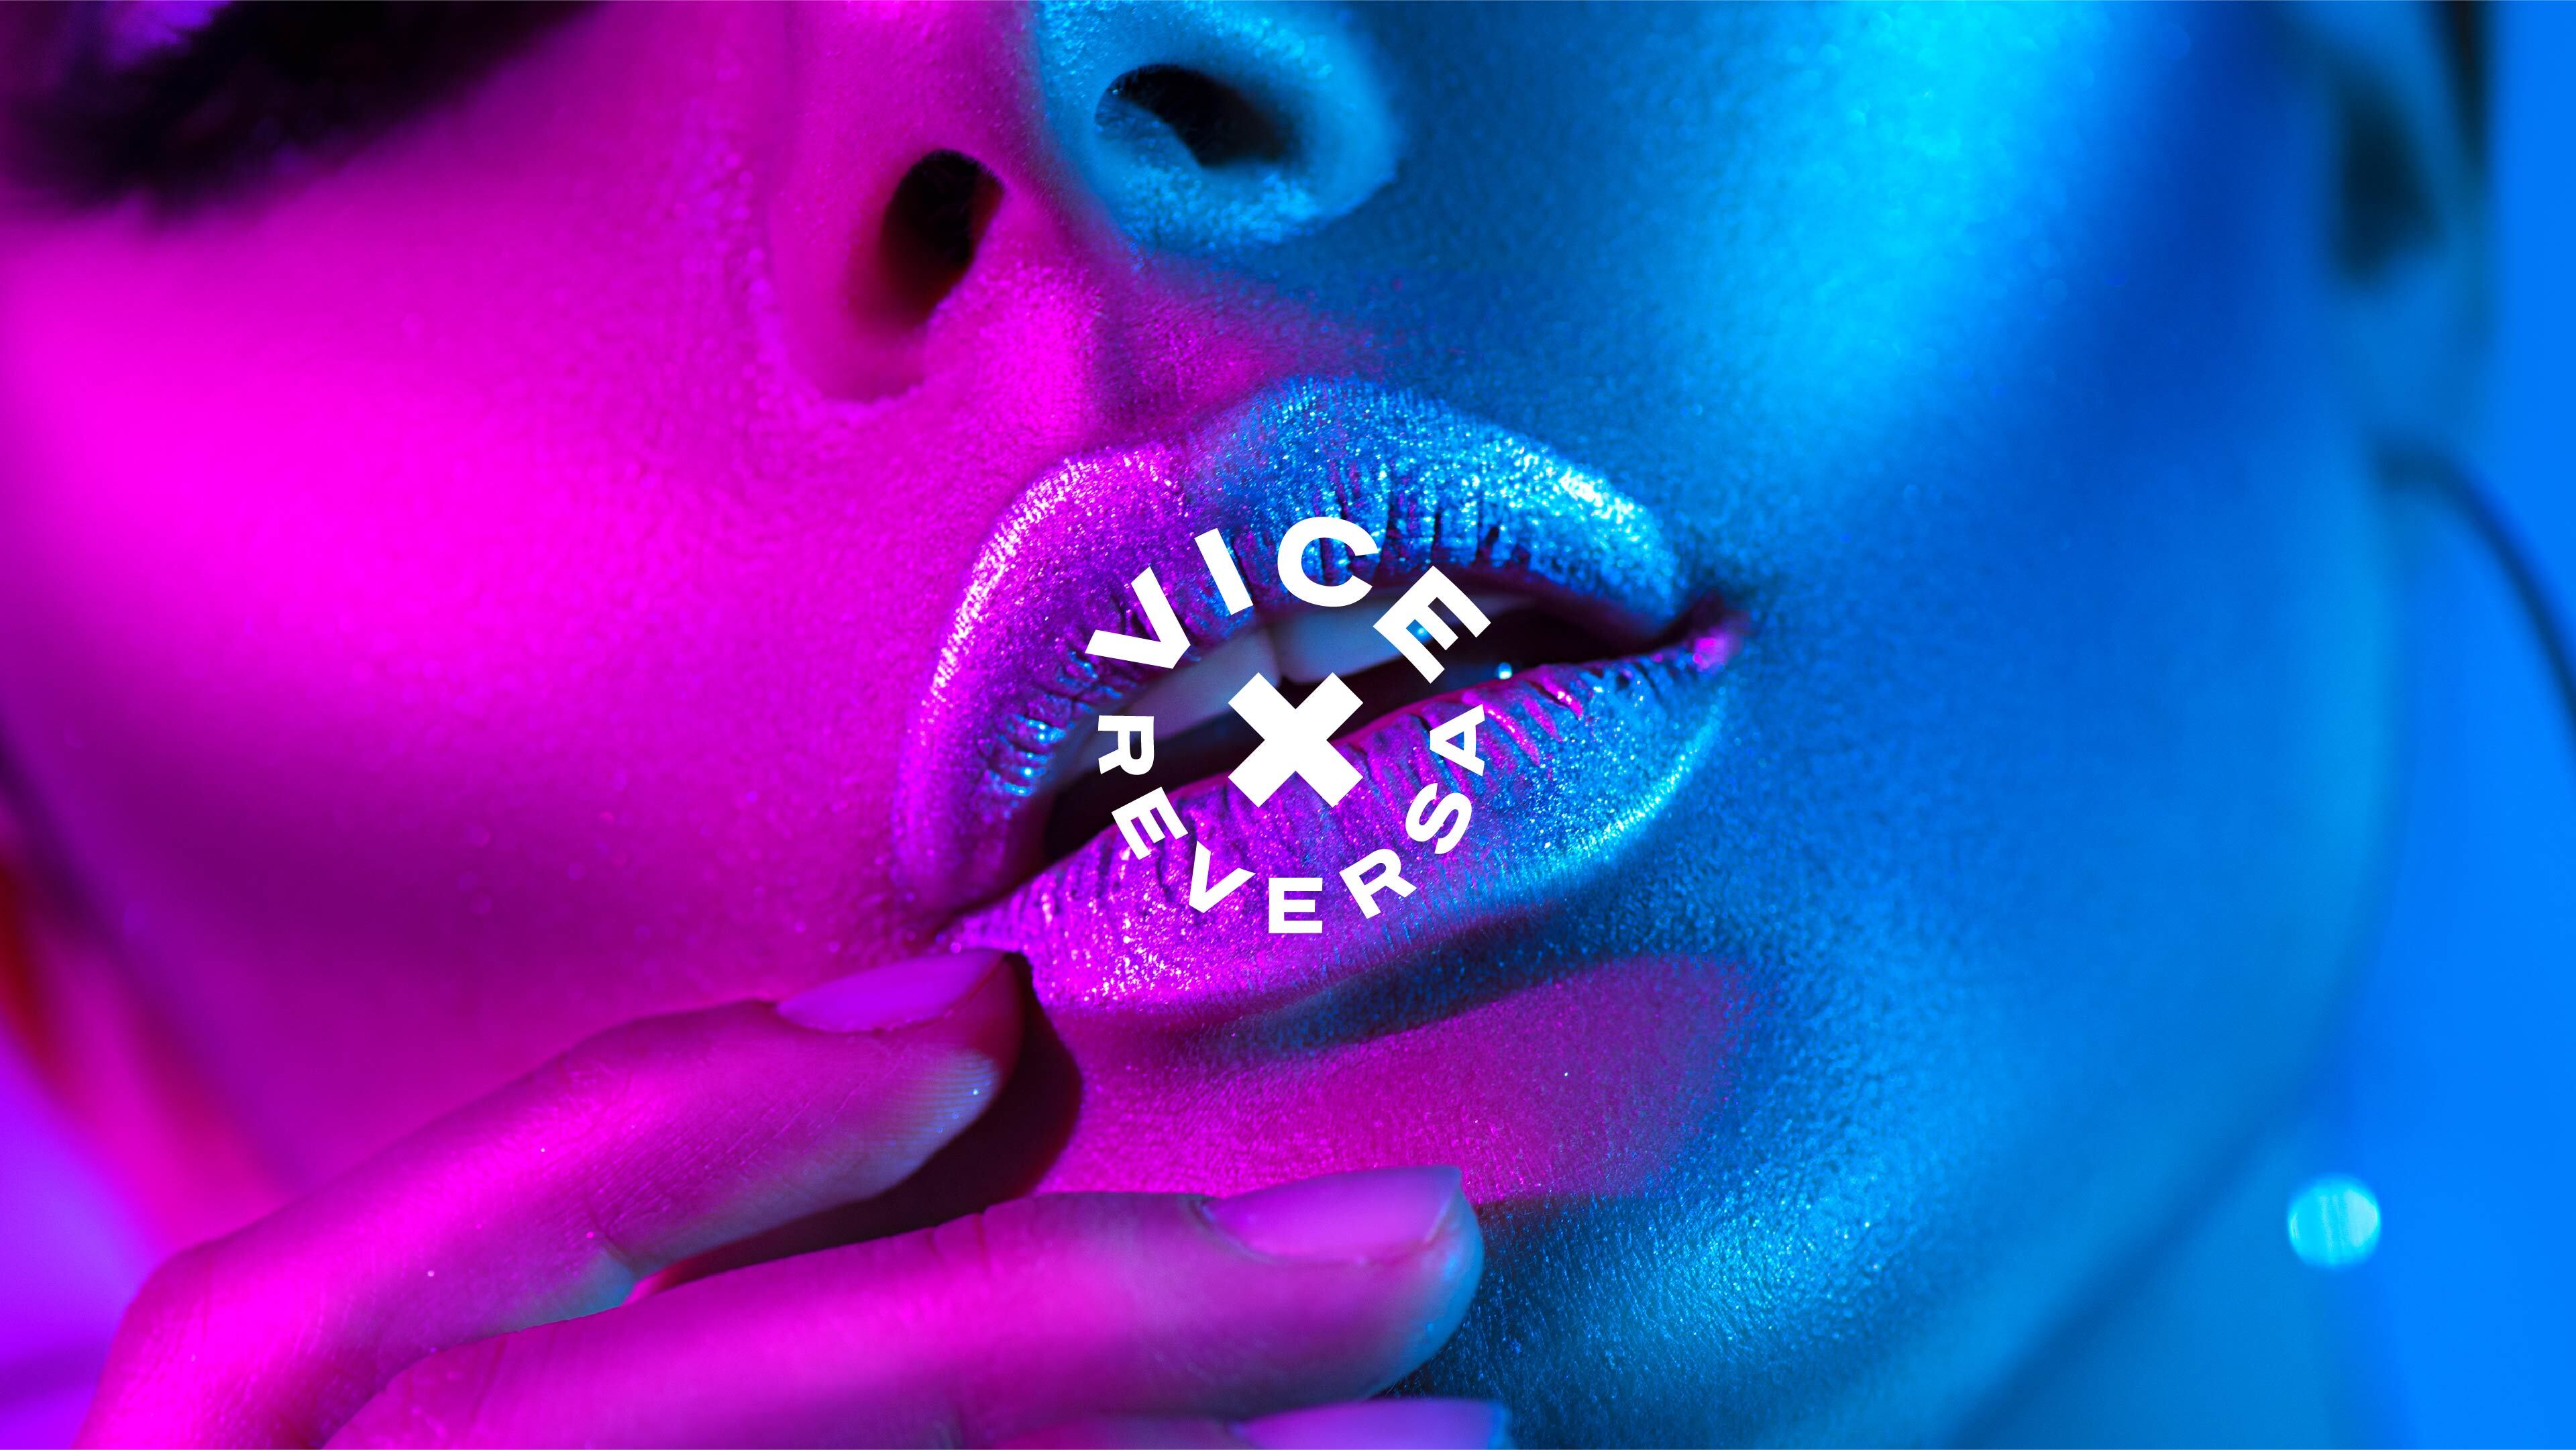 Taxi Studio’s X-Rated Rebrand Targets the Top of the Skincare Market for Vice Reversa